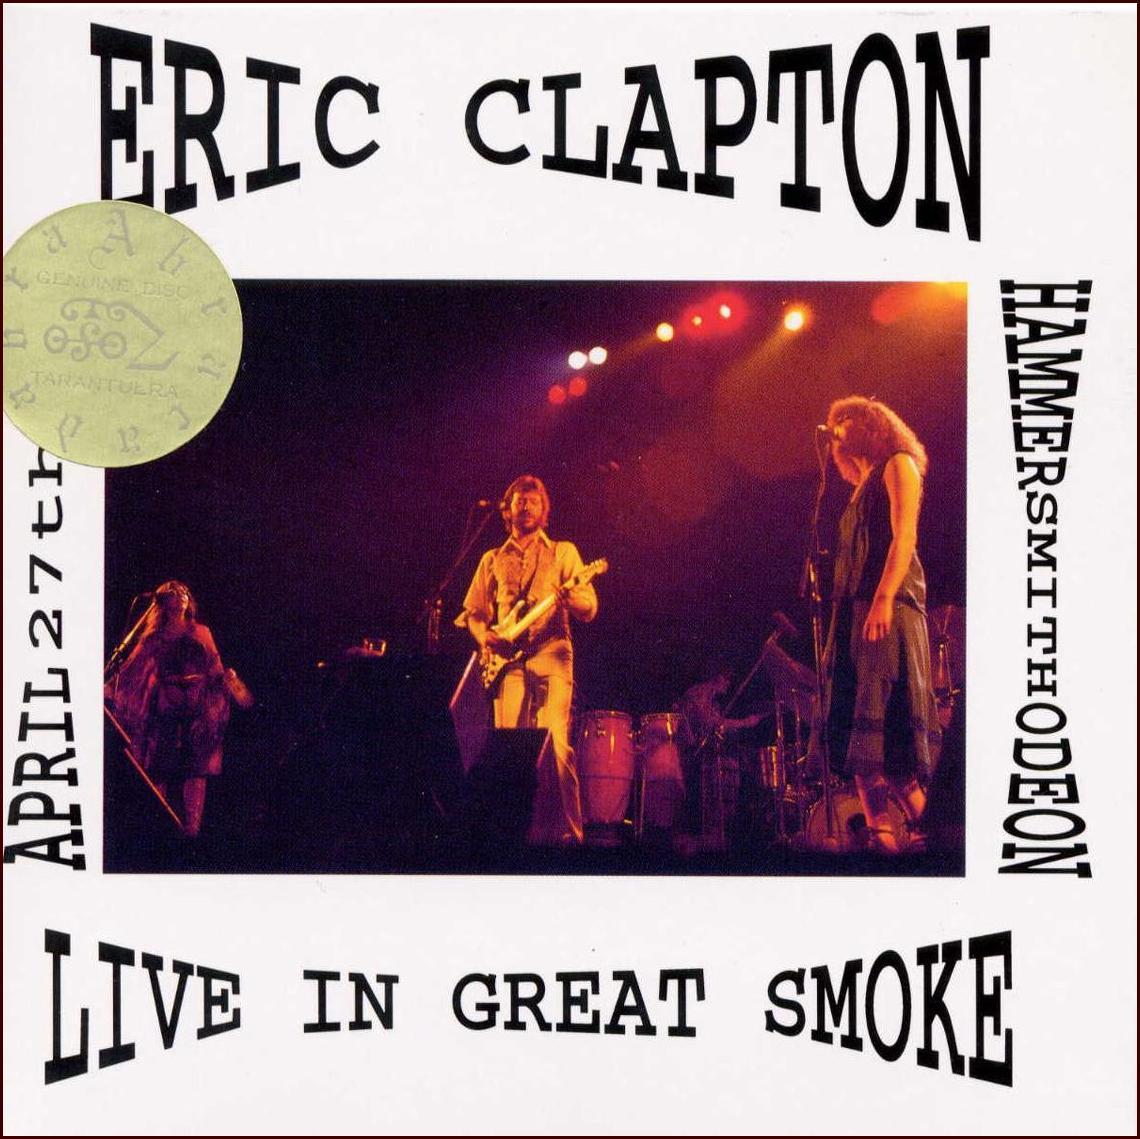 Eric Clapton - Live in Great Smoke